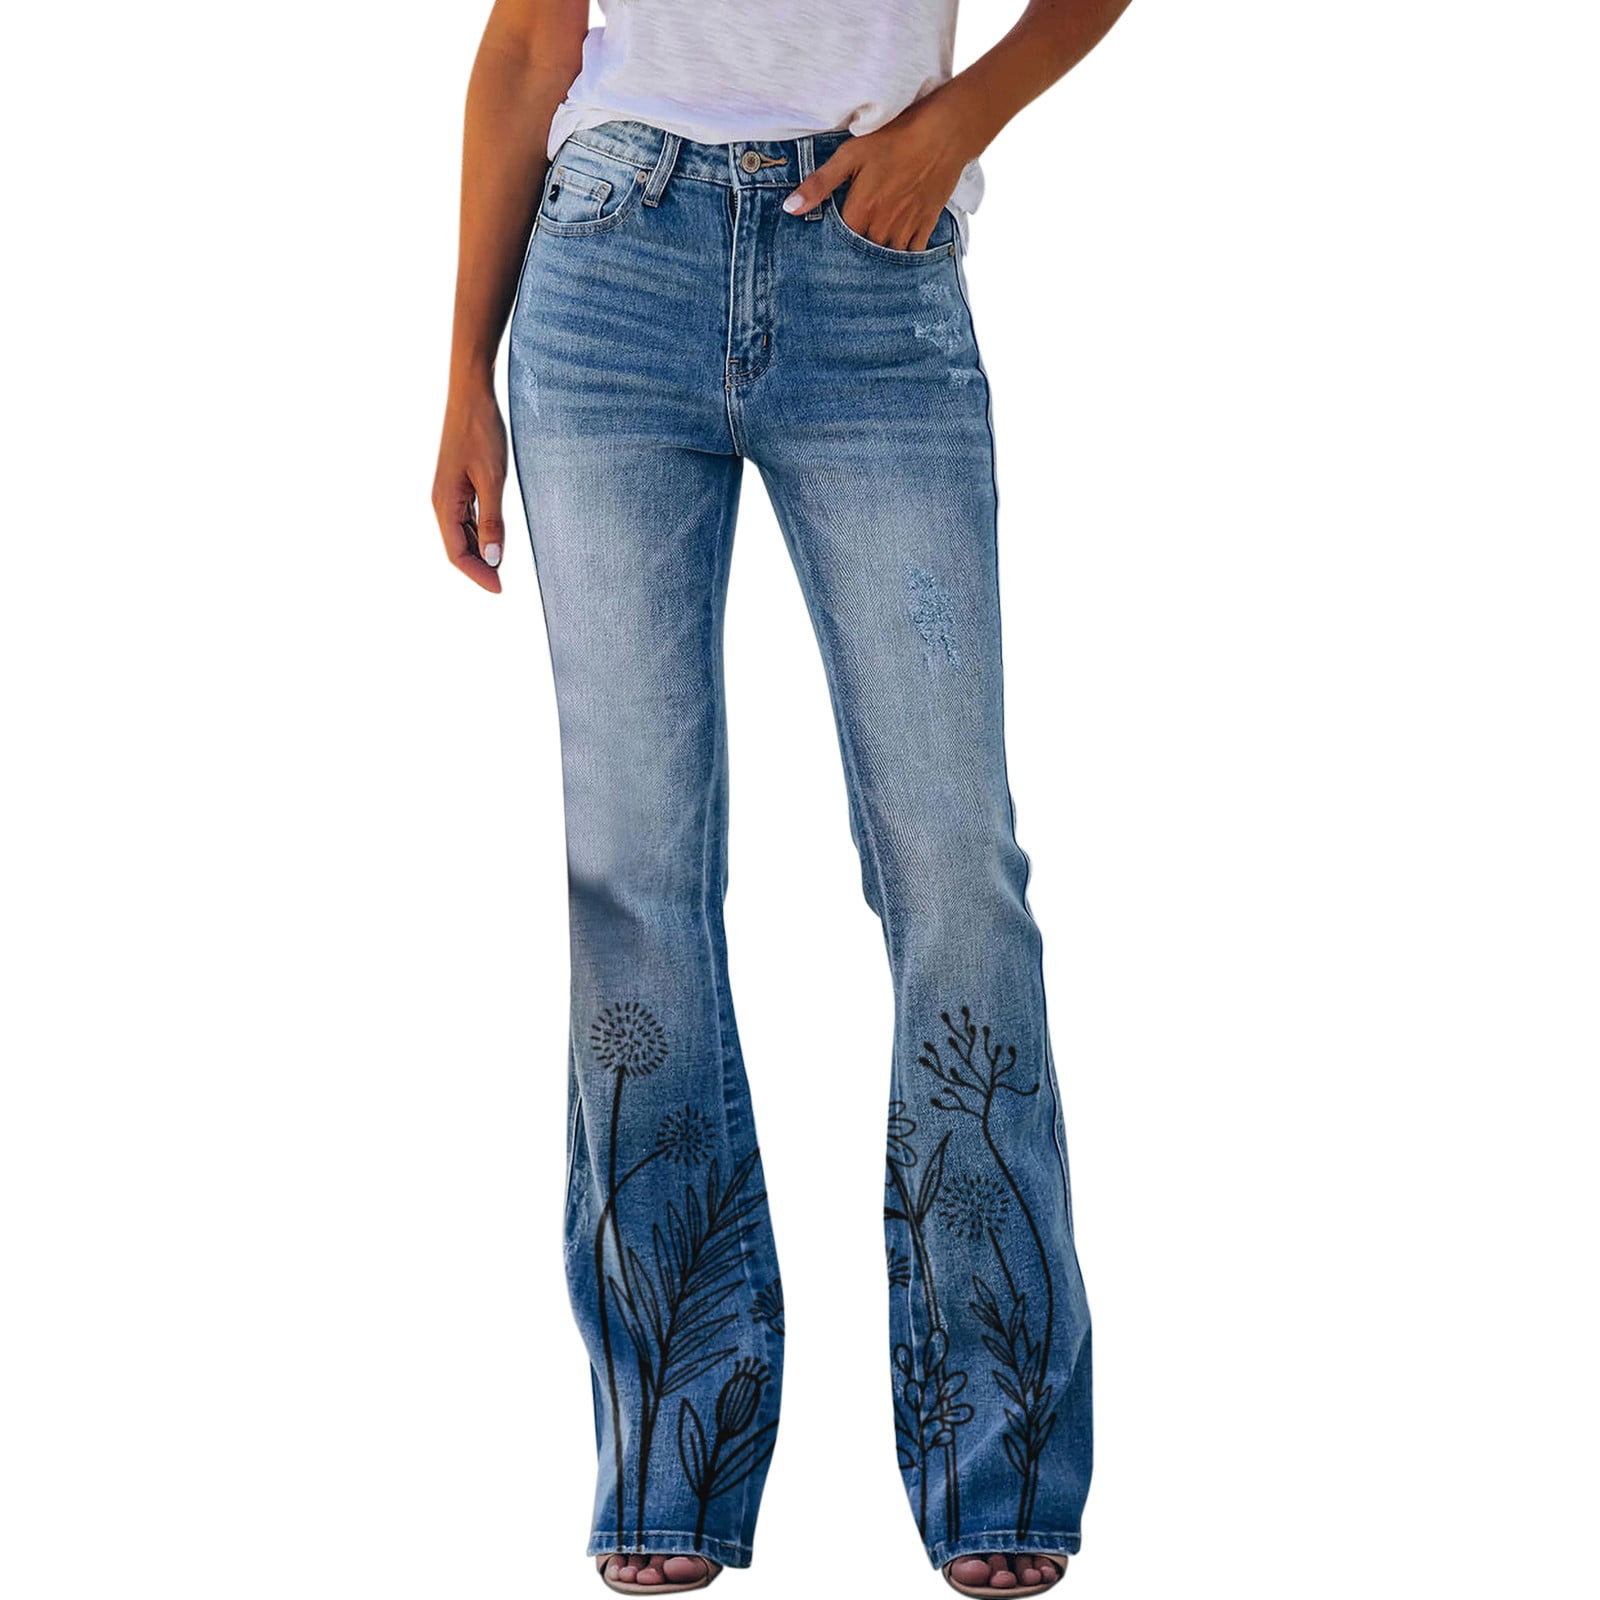 Ierhent Flare Jeans for Woman Jean Pants Women Women's Ripped Destroyed ...